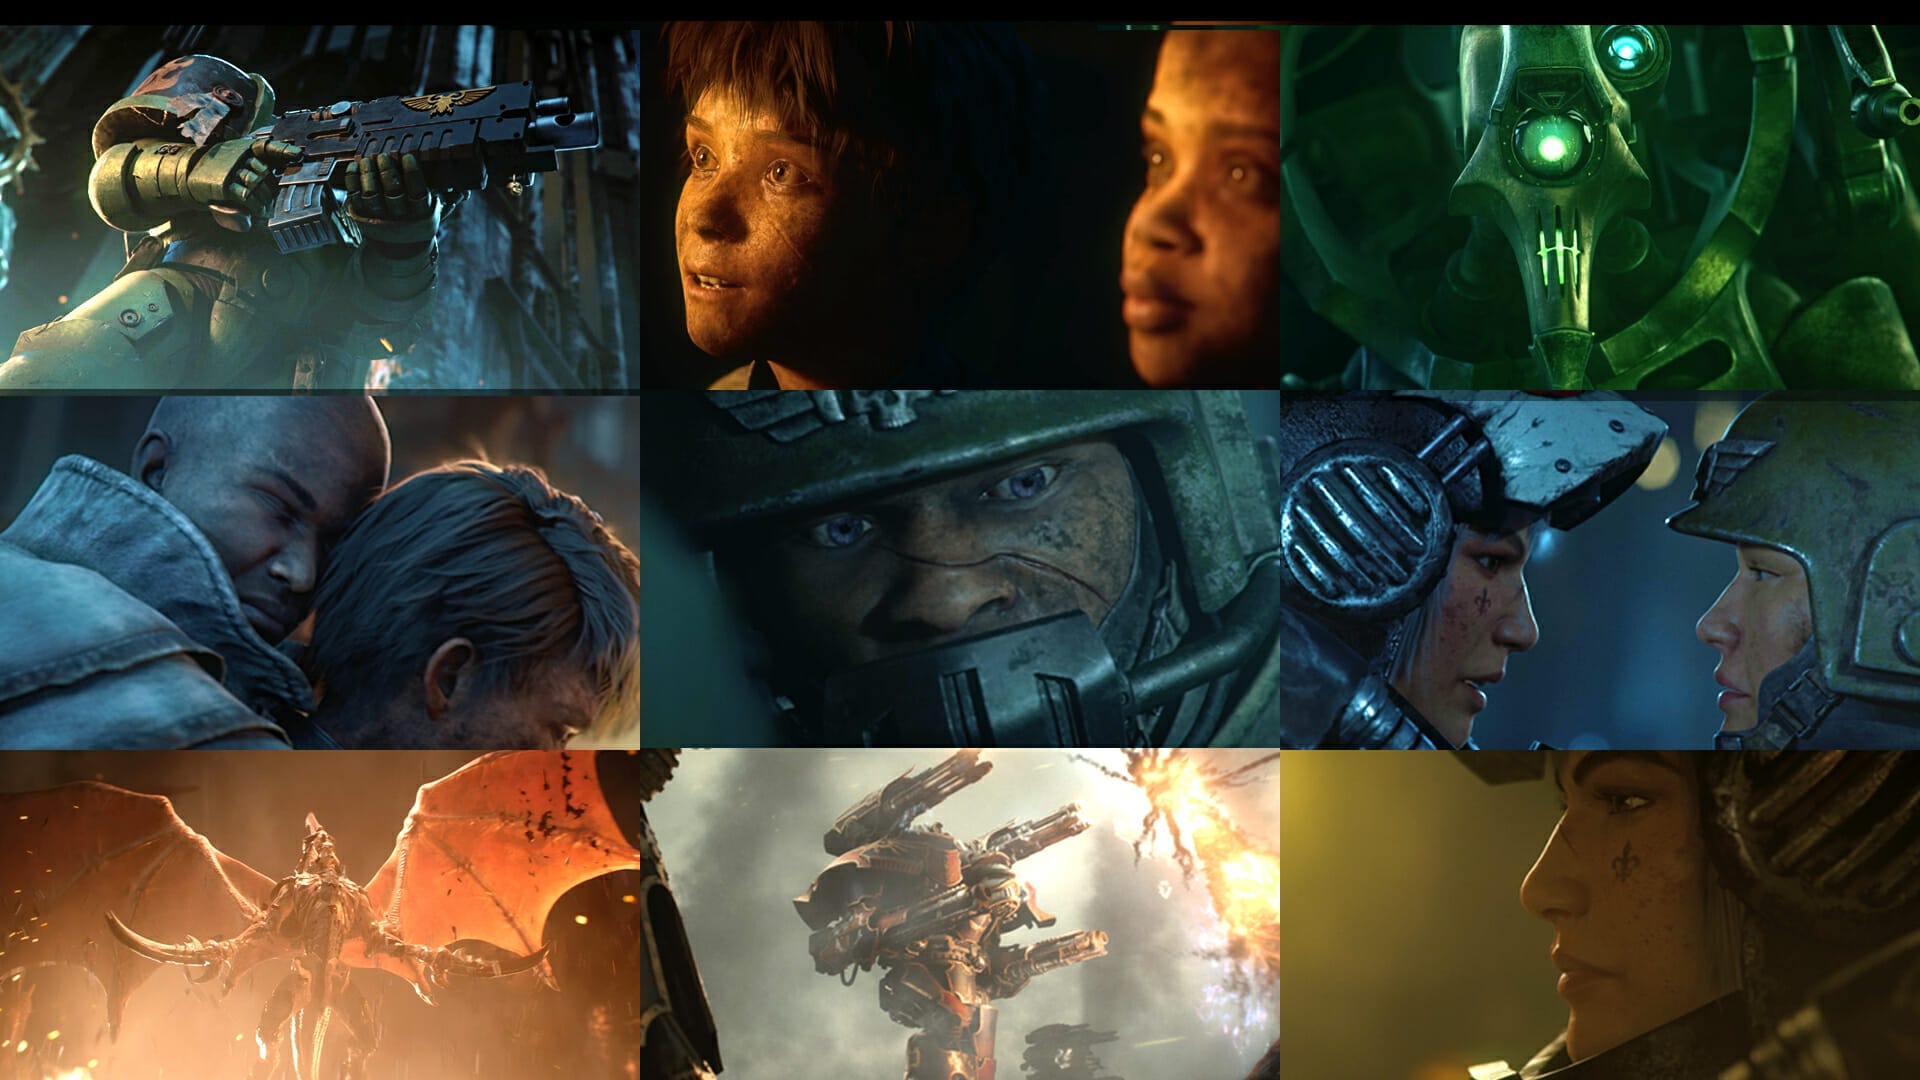 M2 Animation banner showcasing detailed and lifelike characters in combat and emotional scenes. Emphasizes the tagline 